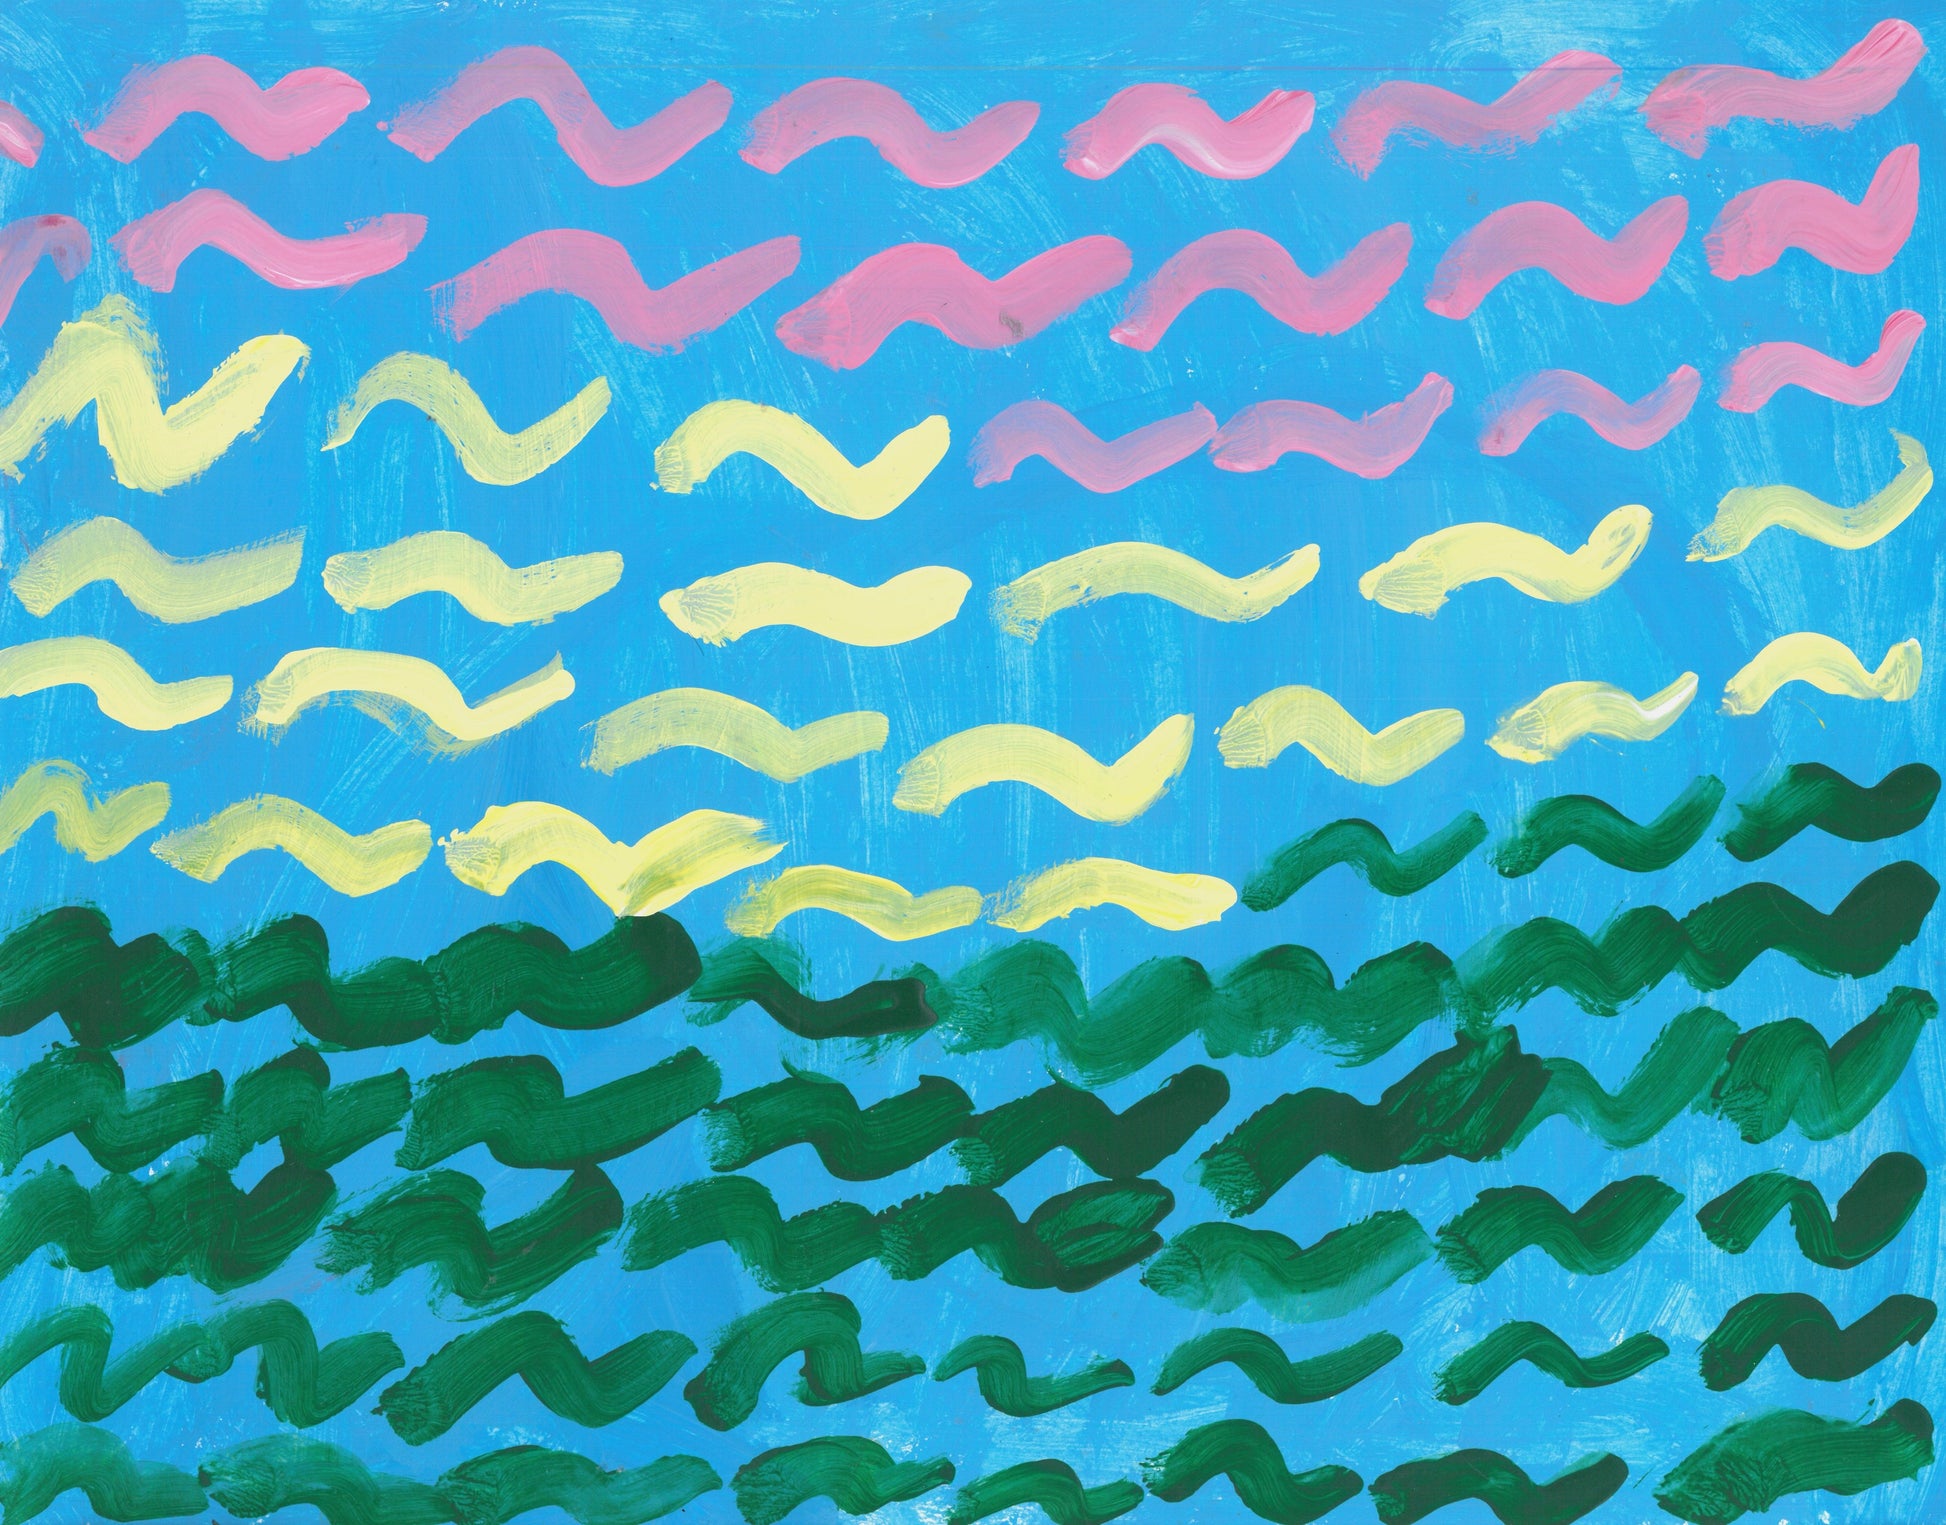 This is a painting with a blue background and green, yellow and pink horizontal squiggles.